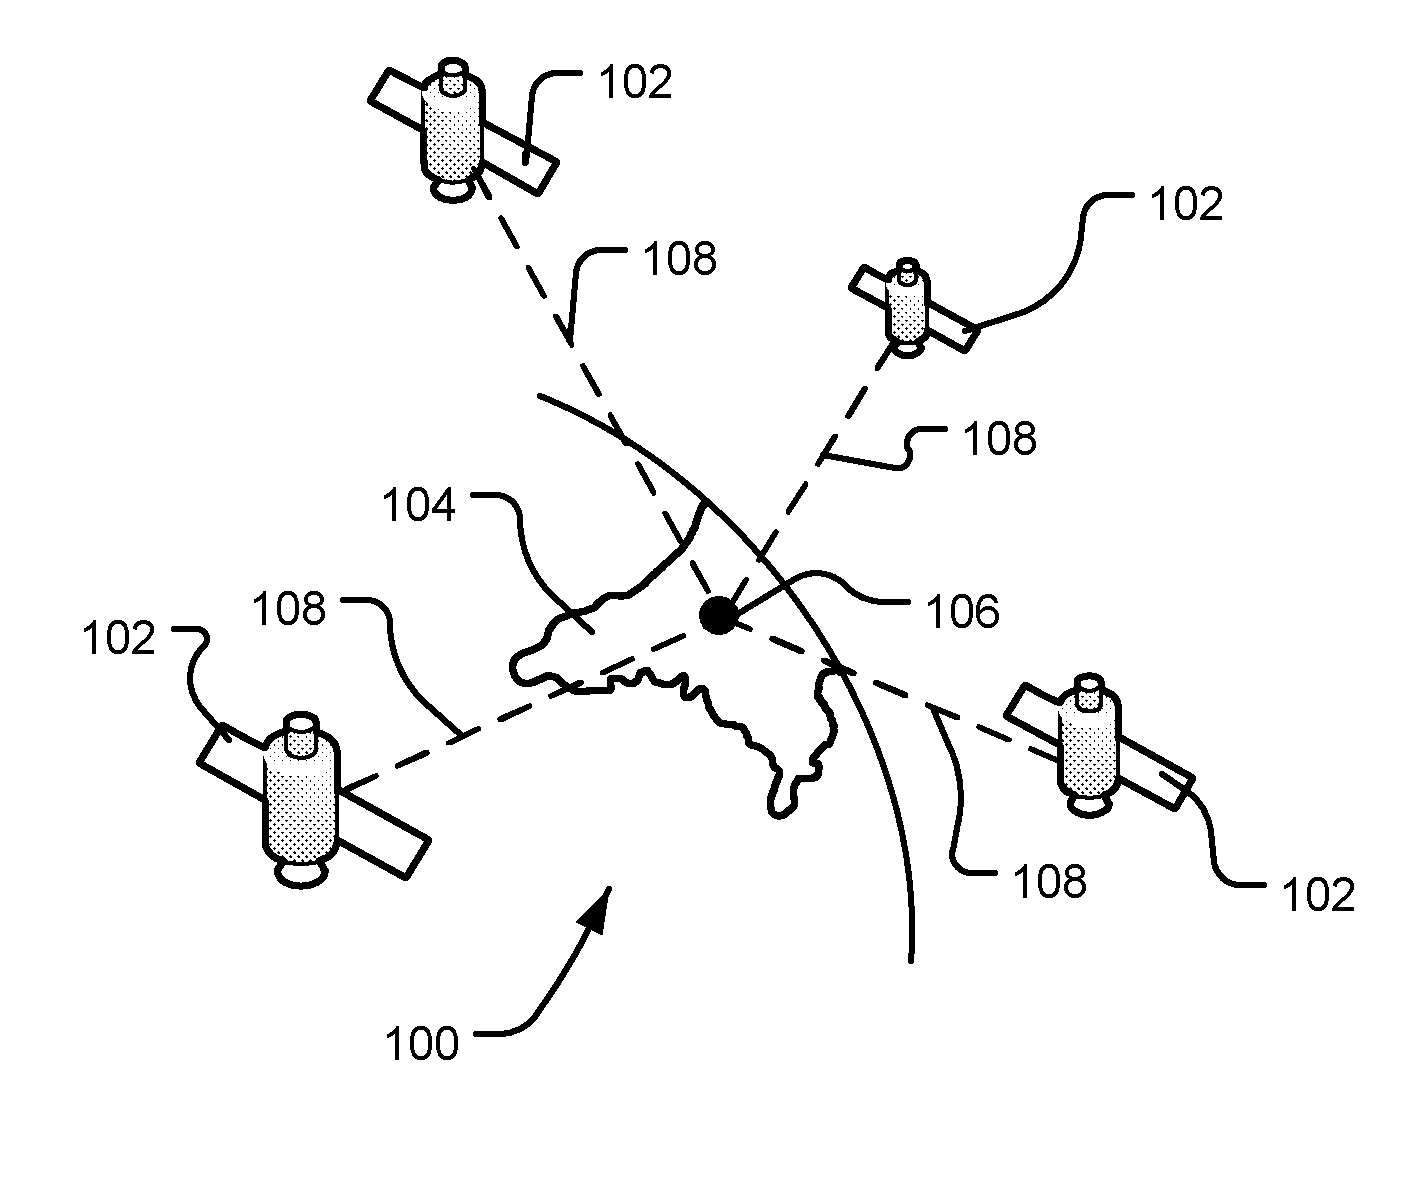 Method of sharing data between  electronic devices